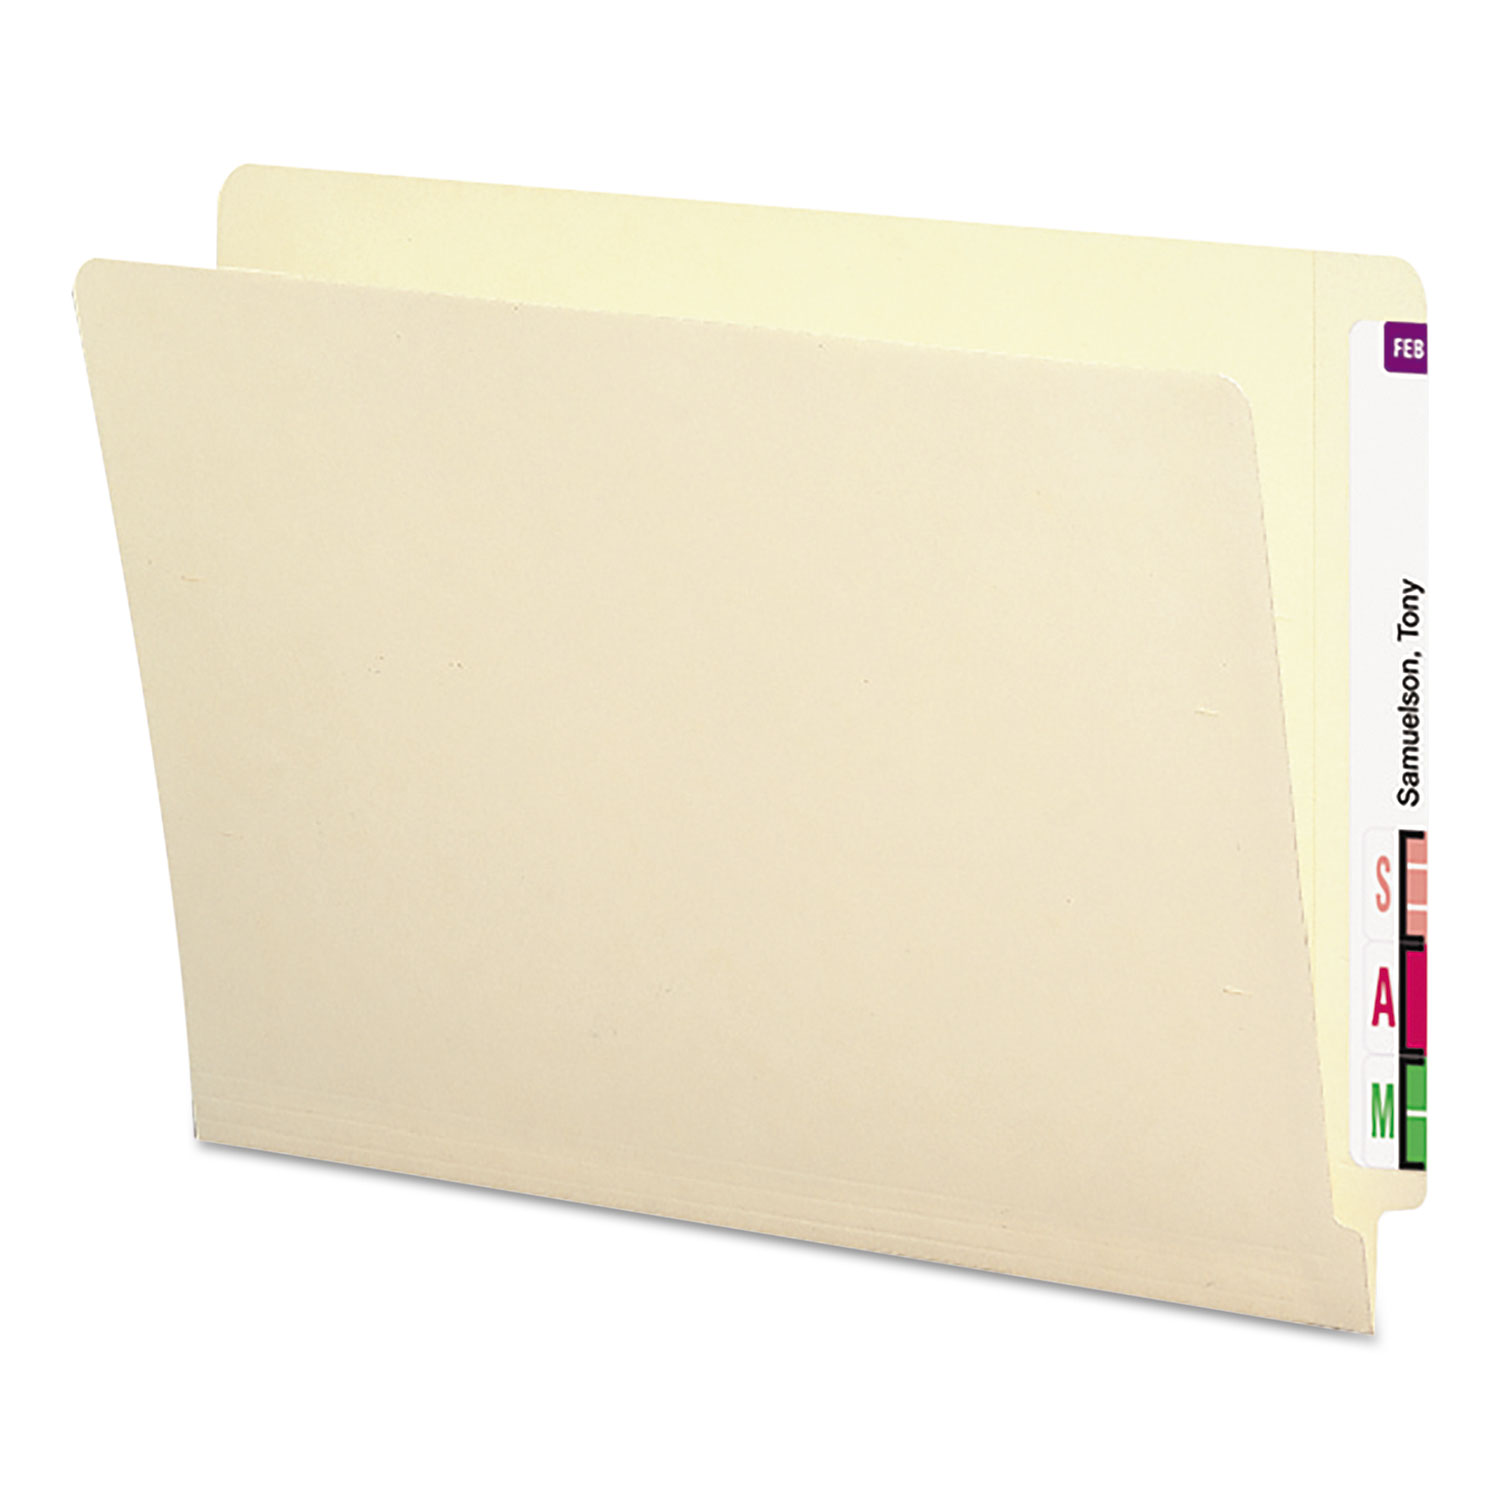  Smead 24113 End Tab Folders with Antimicrobial Product Protection, Straight Tab, Letter Size, Manila, 100/Box (SMD24113) 